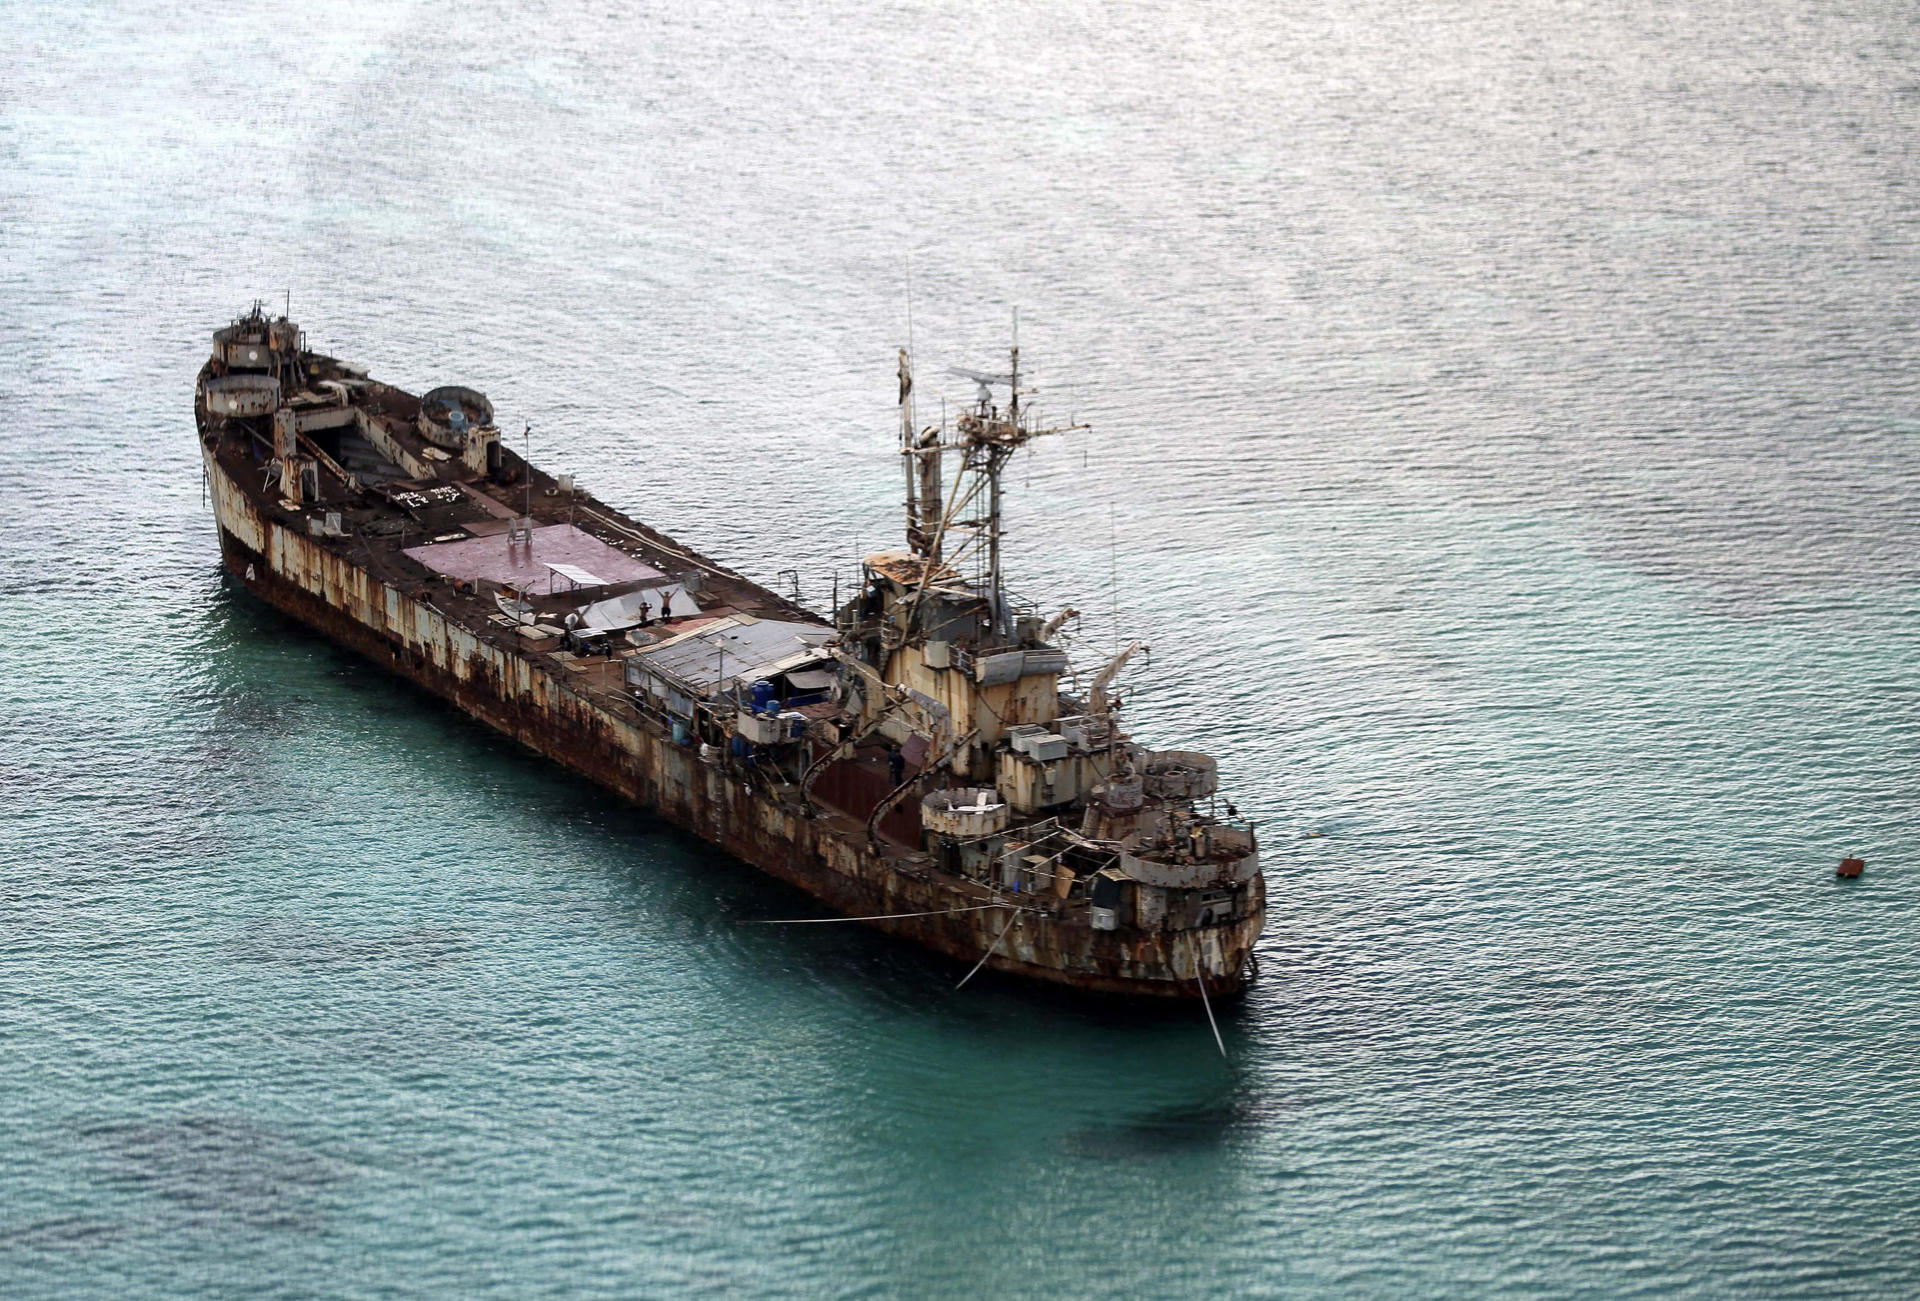 A file picture showing the dilapidated Sierra Madre ship of the Philippine Navy is anchored near Ayungin shoal (Second Thomas Shoal) in the Spratly group of islands in the South China Sea, west of Palawan, Philippines. EPA/EFE/FILE/RITCHIE B. TONGO / POOL